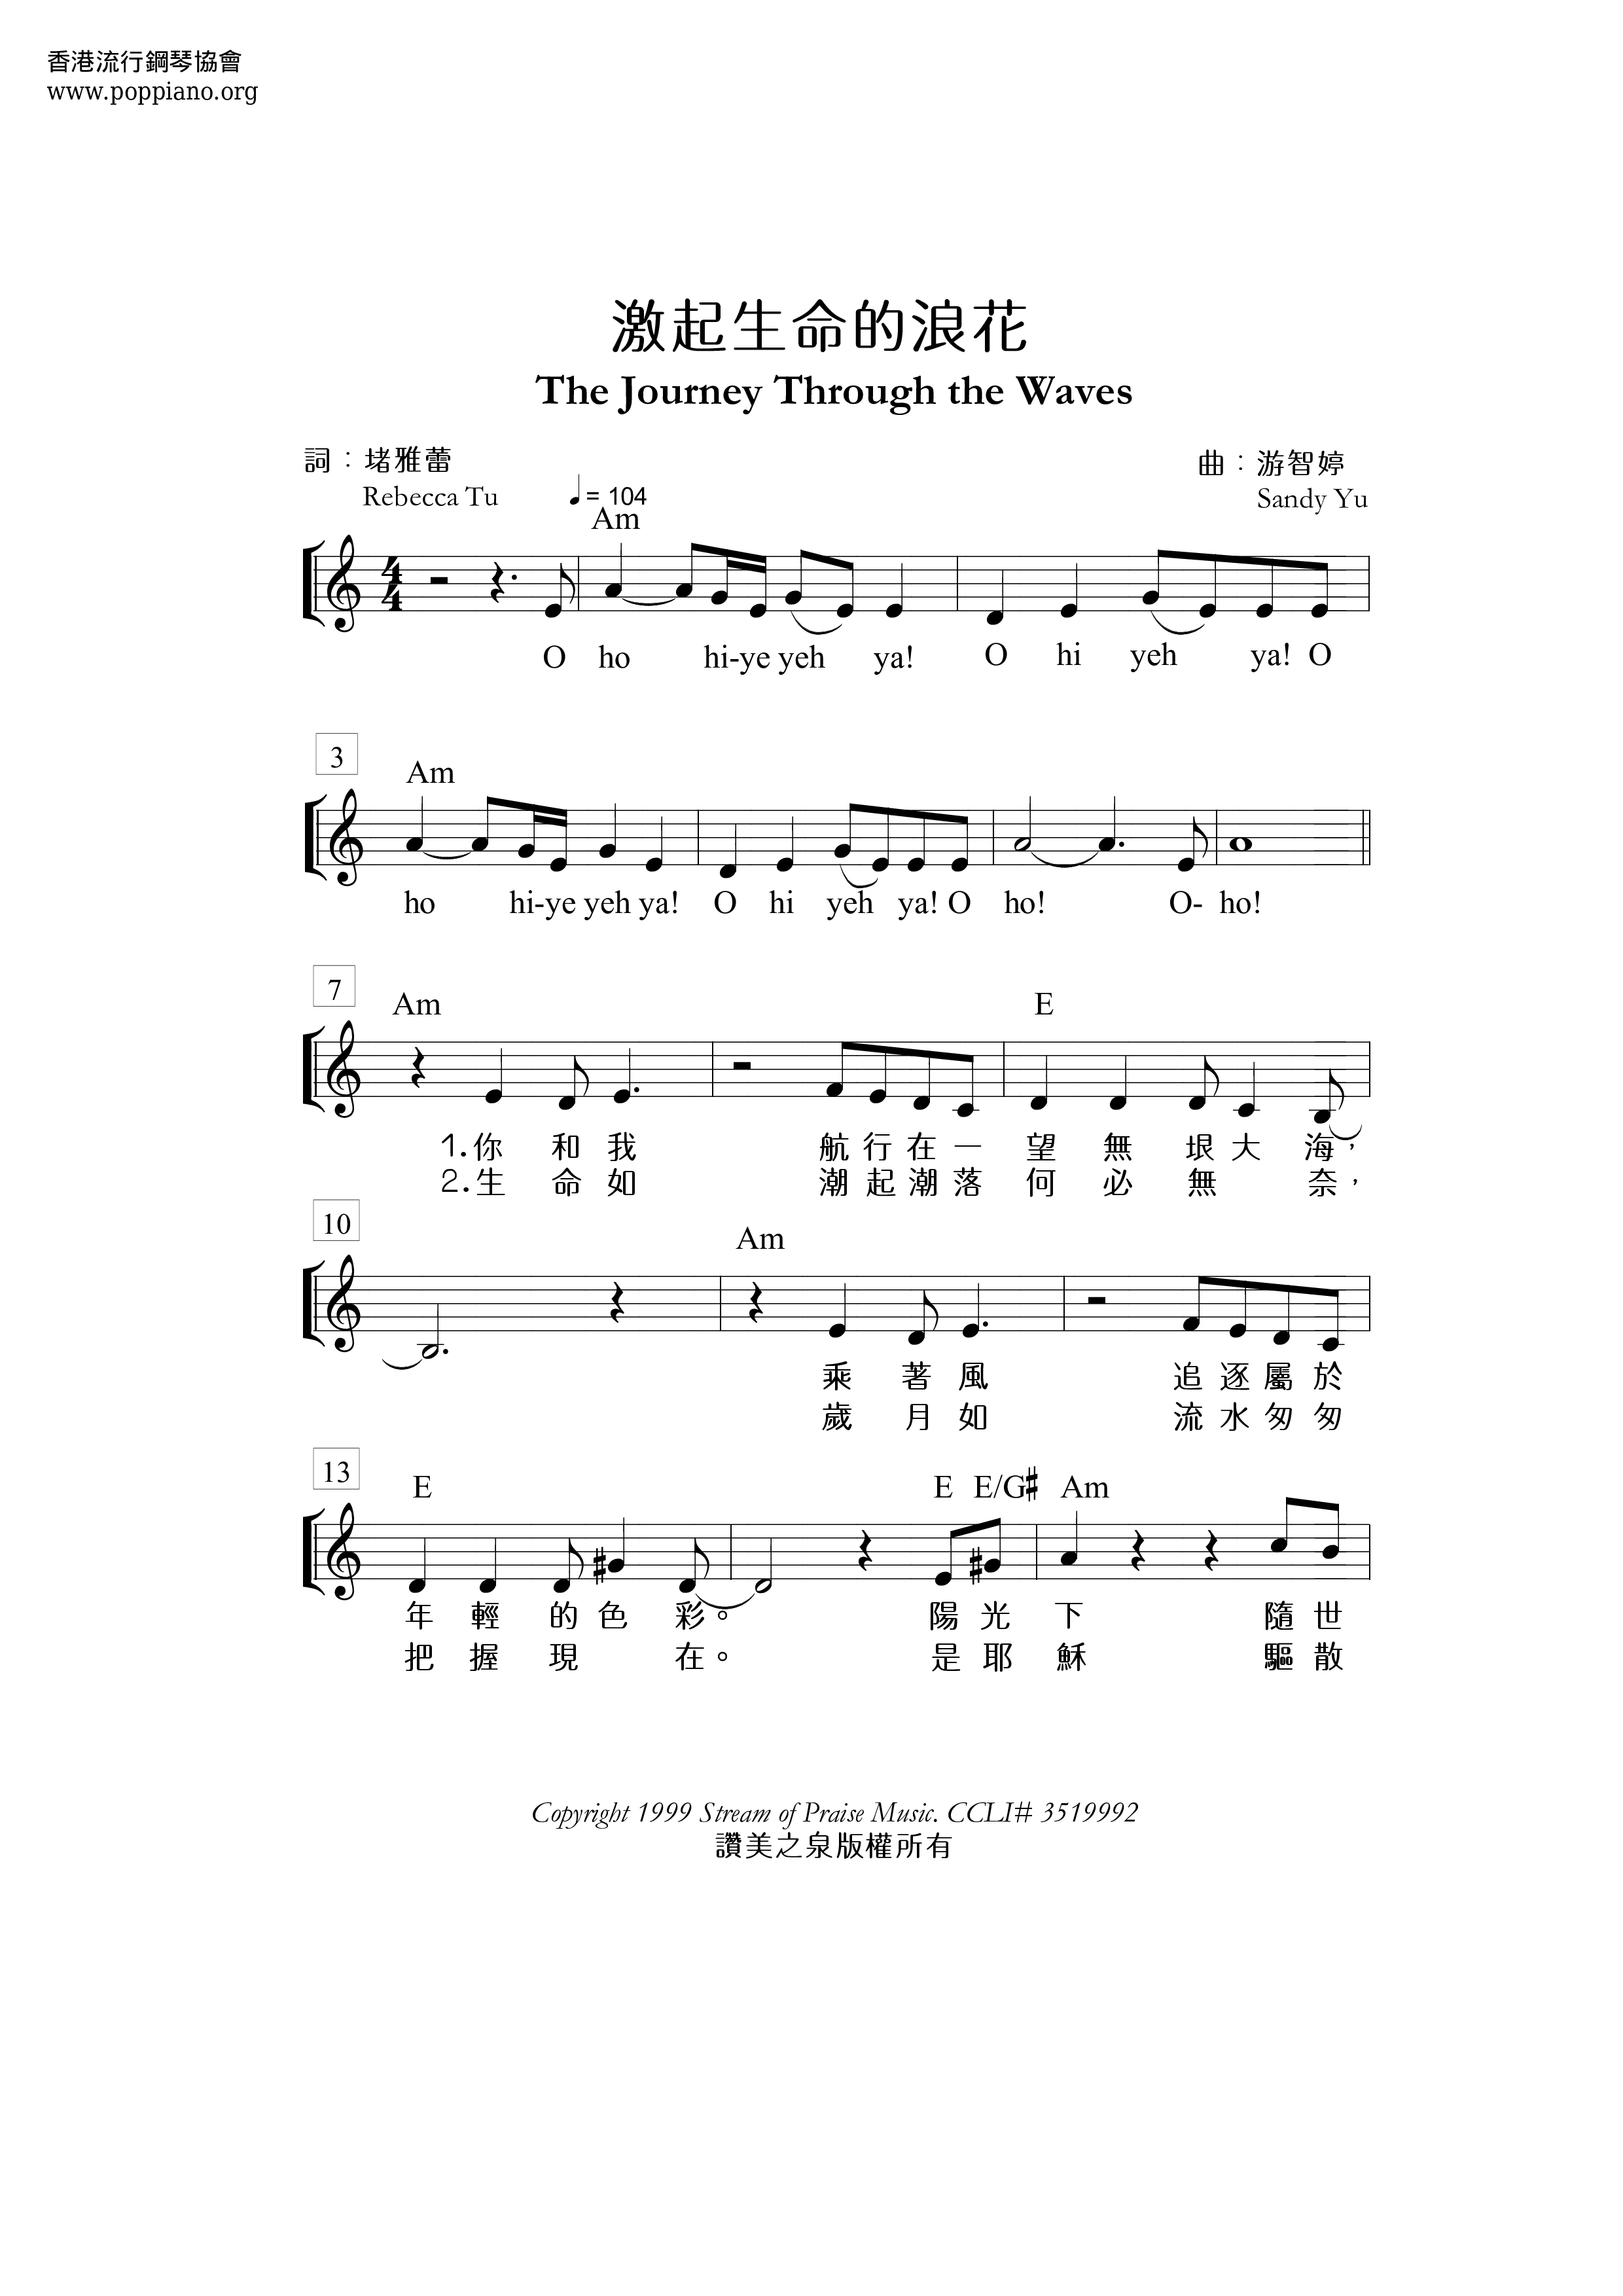 The Journey Through The Waves Score